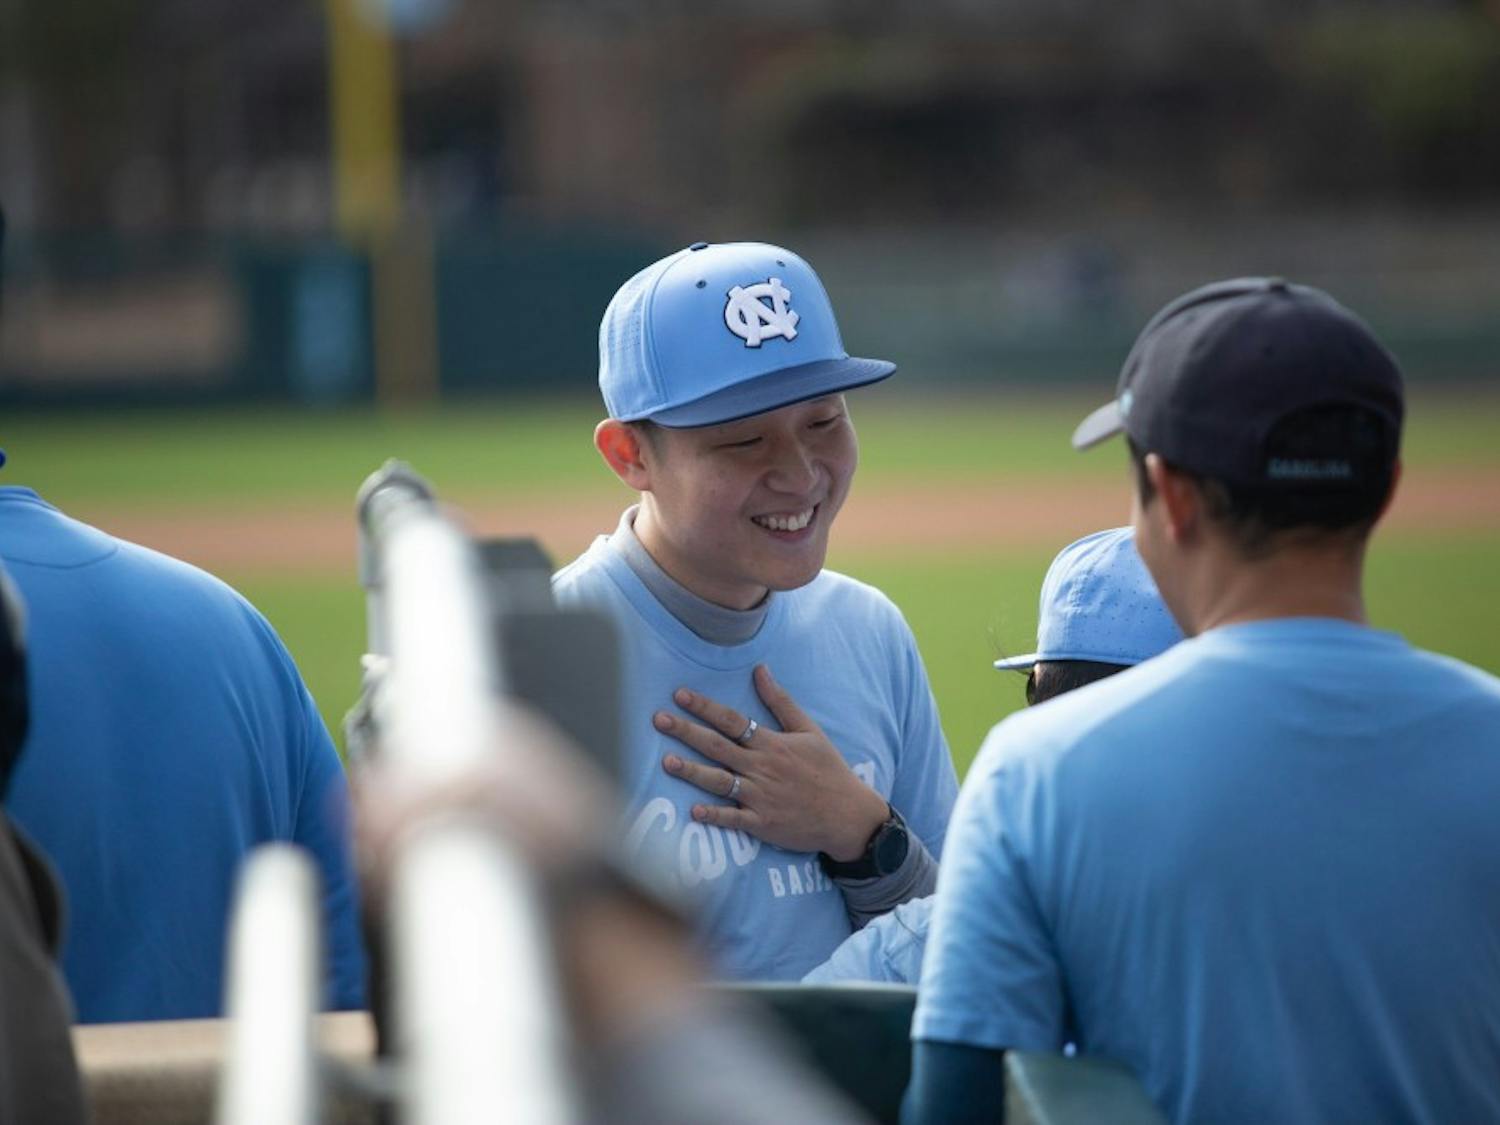 Chut Techalertavorkul traveled all the way from Thailand to throw out the first pitch at Boshamer Stadium. UNC won, 4-3, against UNCW on Feb. 26, 2019.